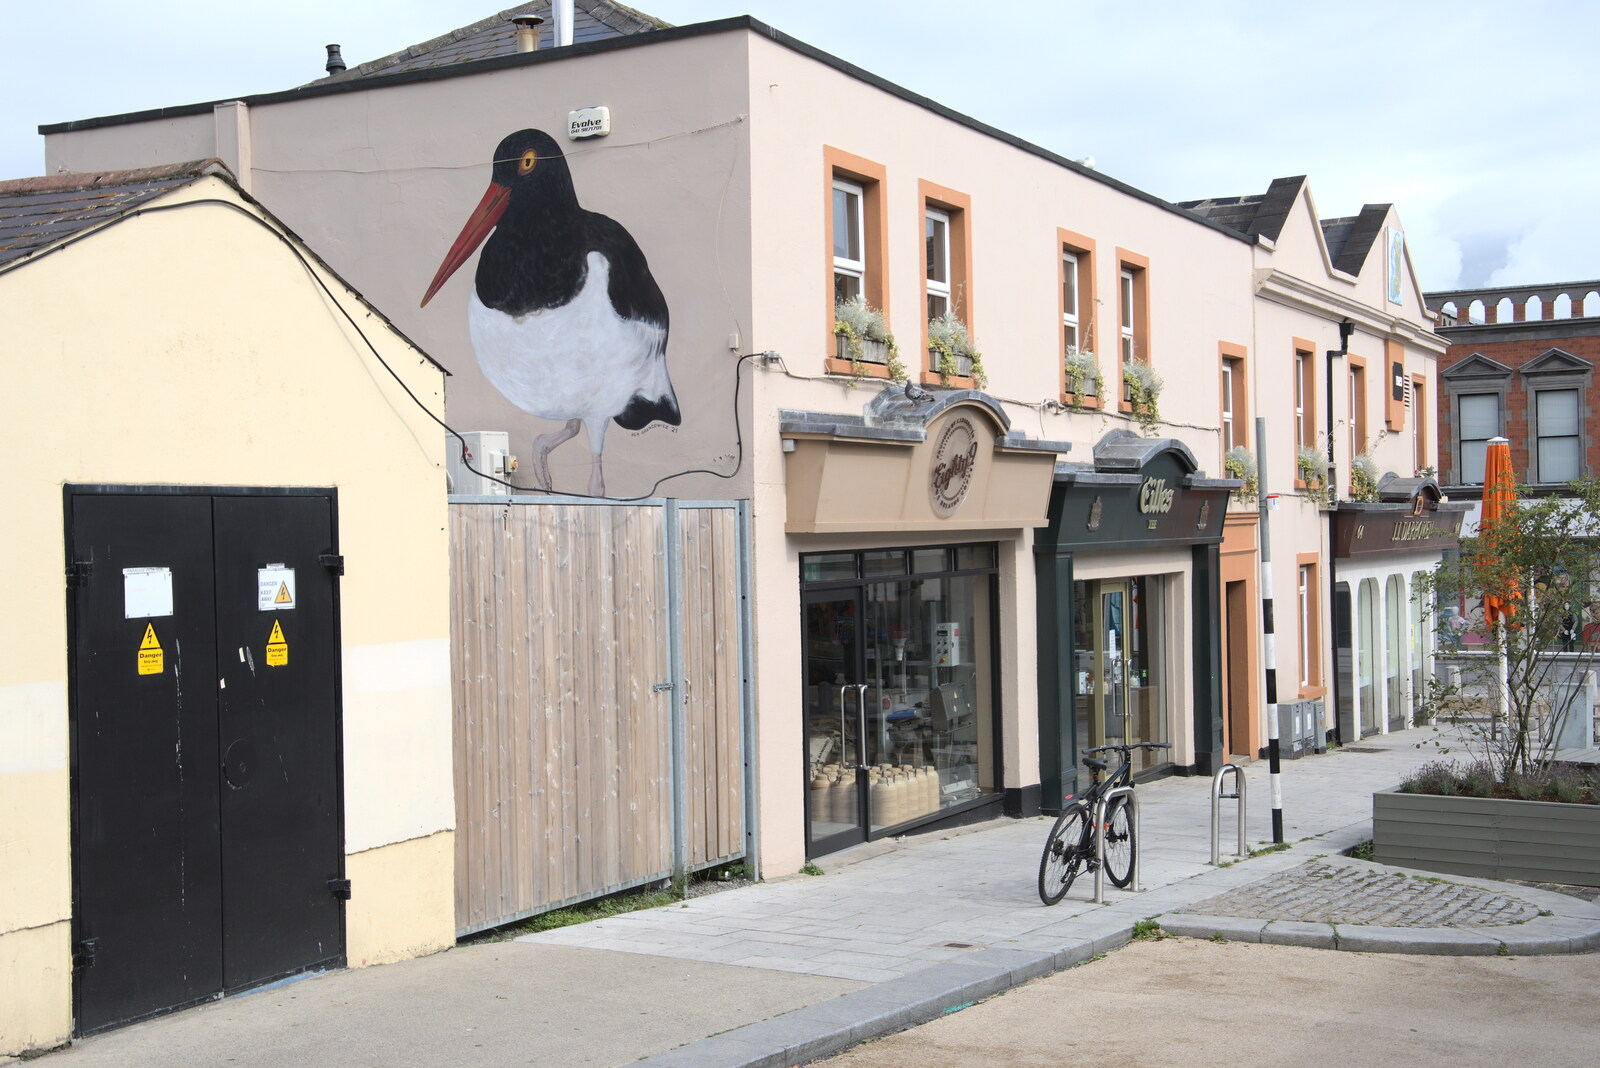 More bird art from Manorhamilton and the Street Art of Dún Laoghaire, Ireland - 15th August 2021